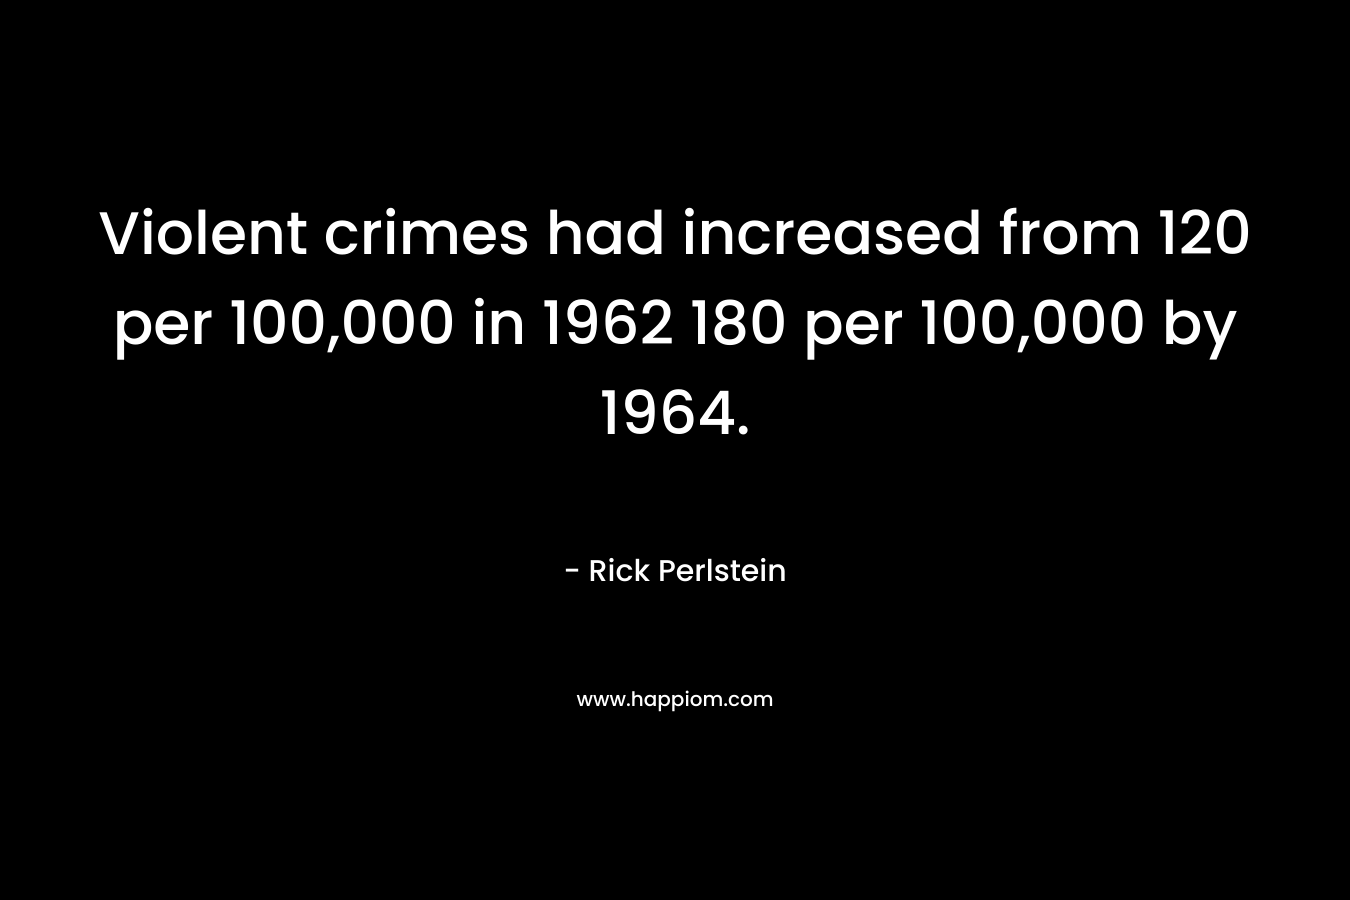 Violent crimes had increased from 120 per 100,000 in 1962 180 per 100,000 by 1964. – Rick Perlstein